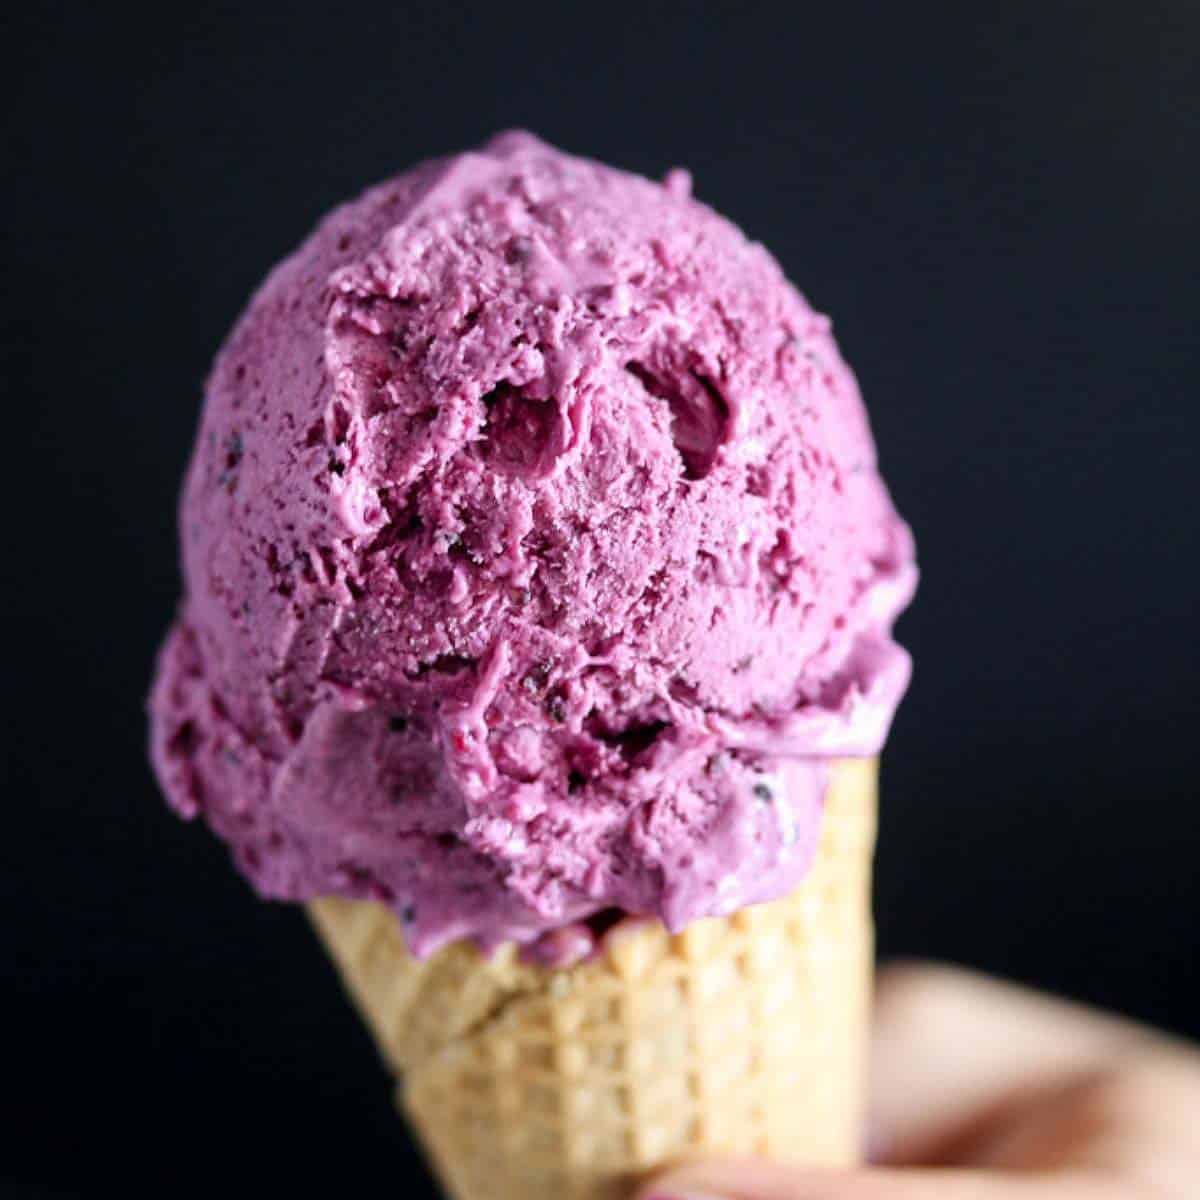 Black Currant Ice Cream (with Condensed Milk) - Where Is My Spoon